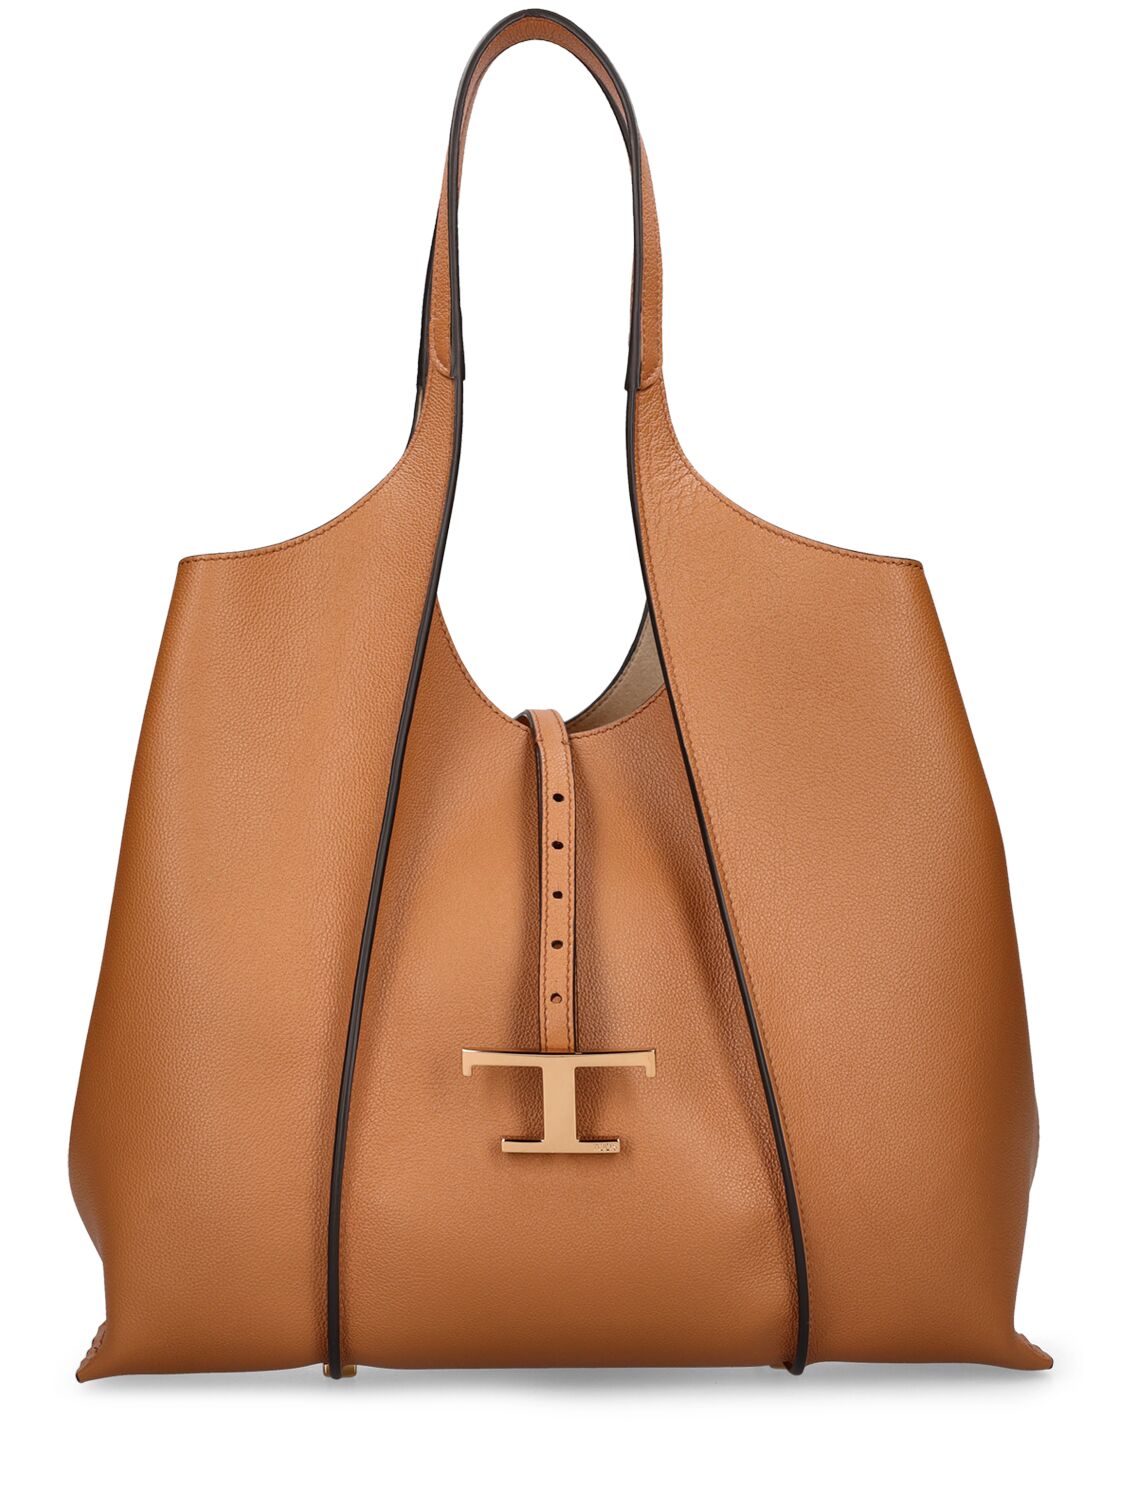 TOD'S SHOPPING T MEDIUM LEATHER TOTE BAG